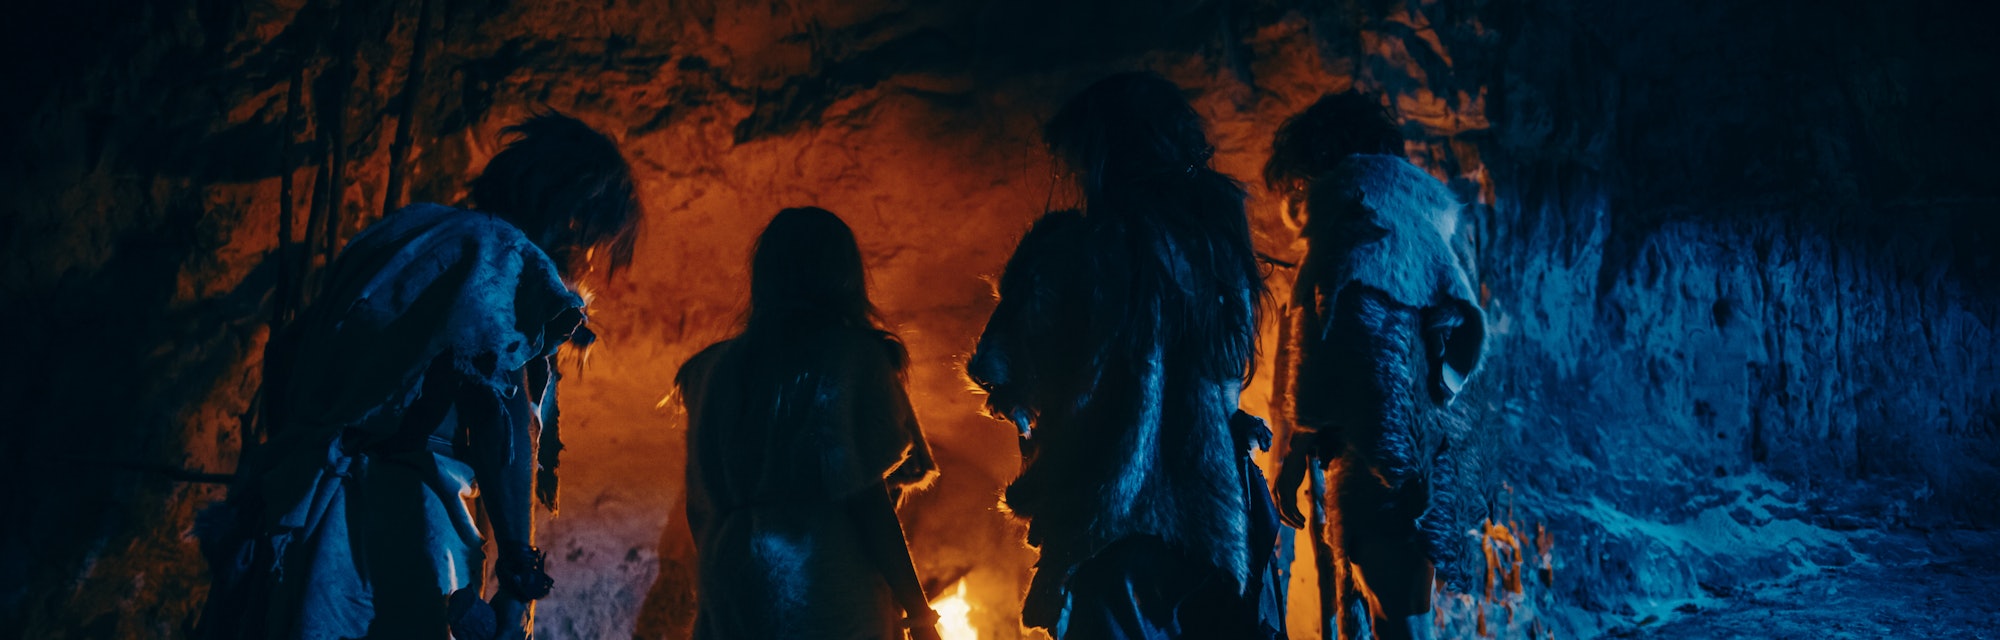 Tribe of Prehistoric Hunter-Gatherers Wearing Animal Skins Live in a Cave at Night. Neanderthal or H...